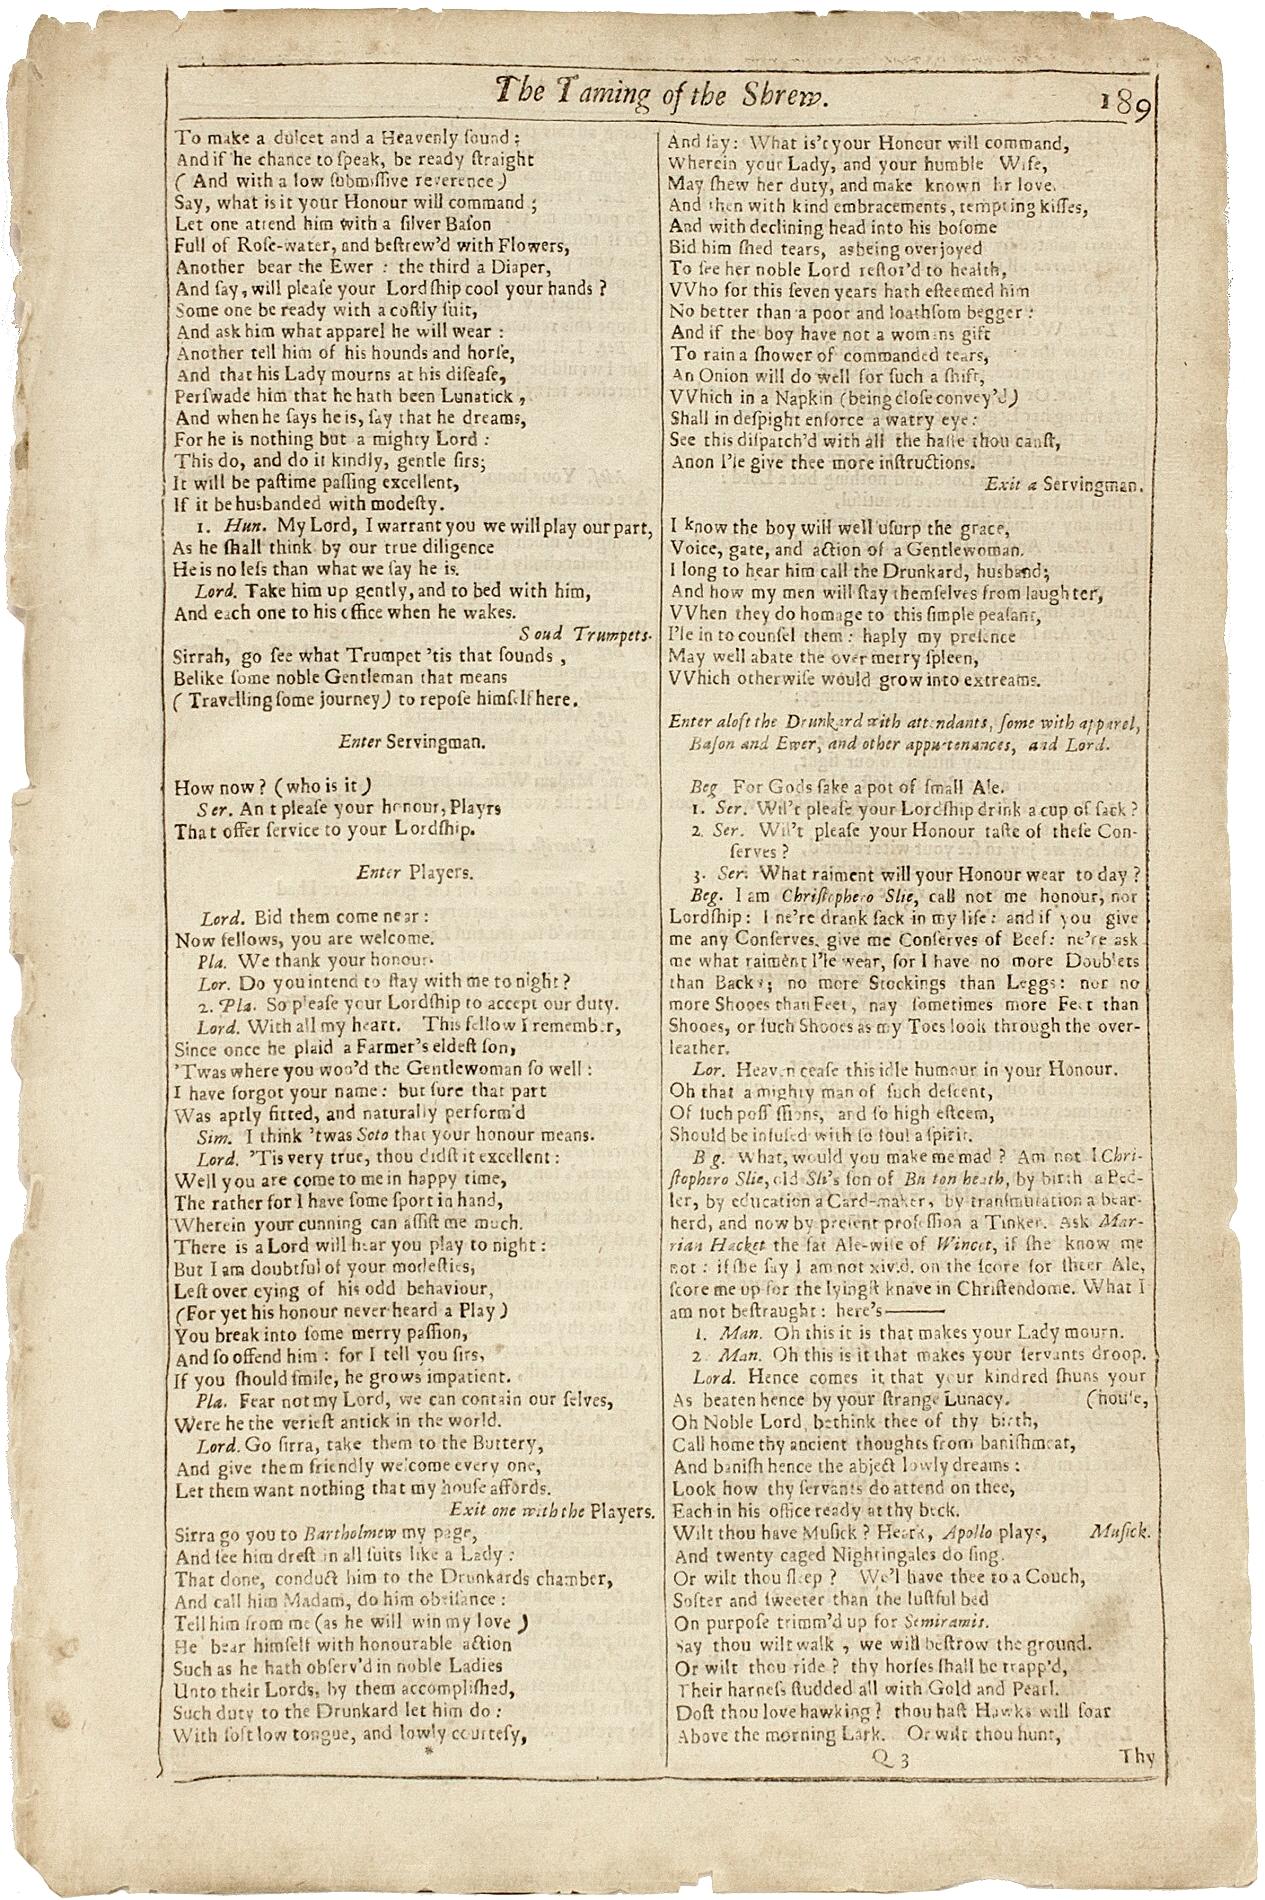 taming of the shrew poem